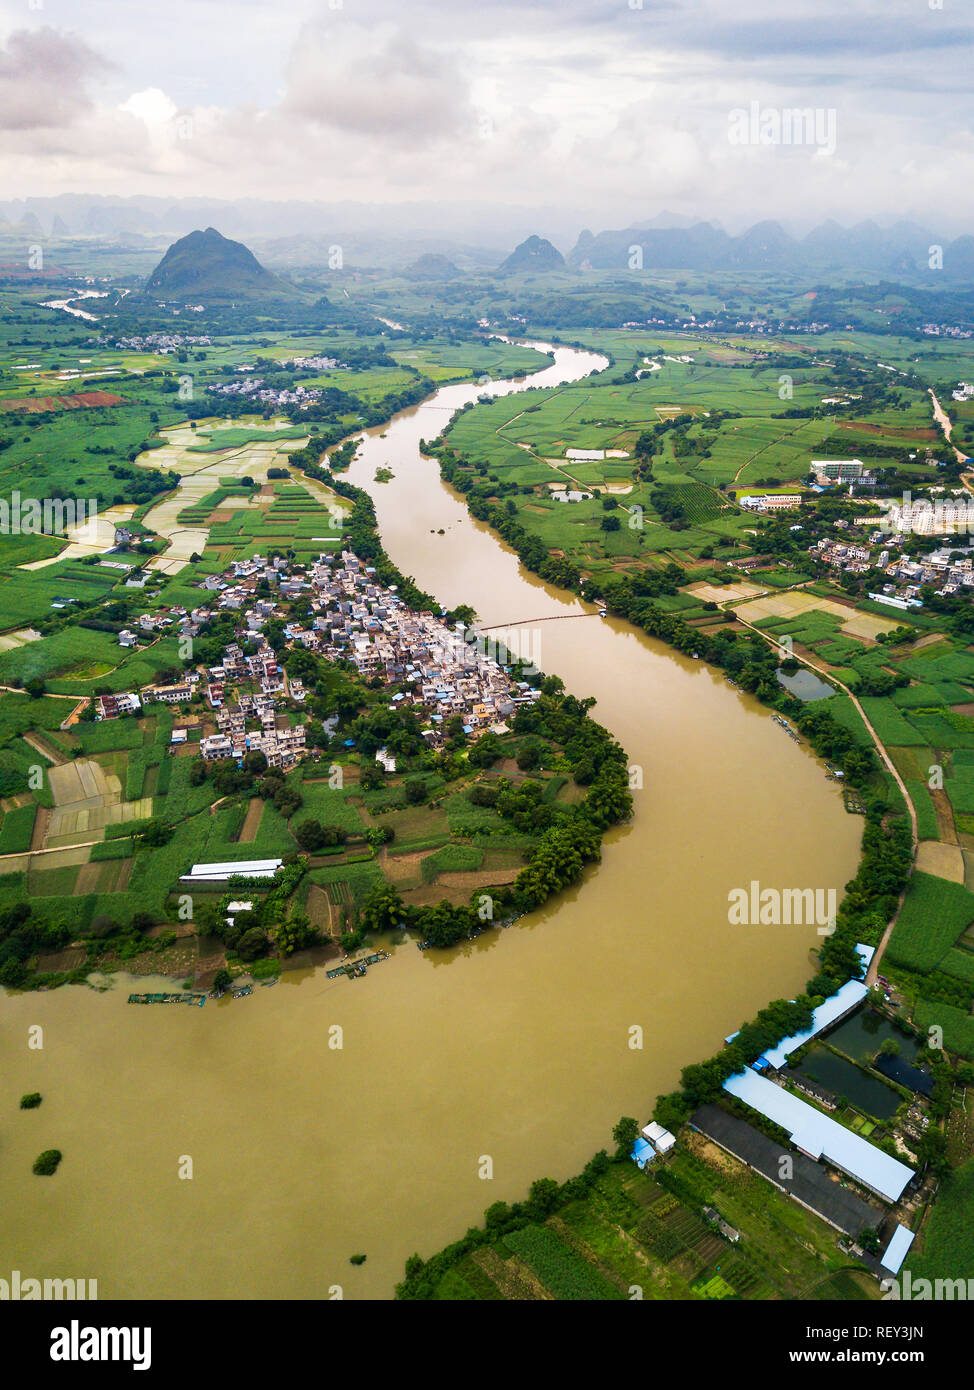 Stunning landscape of rice fields divided by river in Guangxi province, China Stock Photo